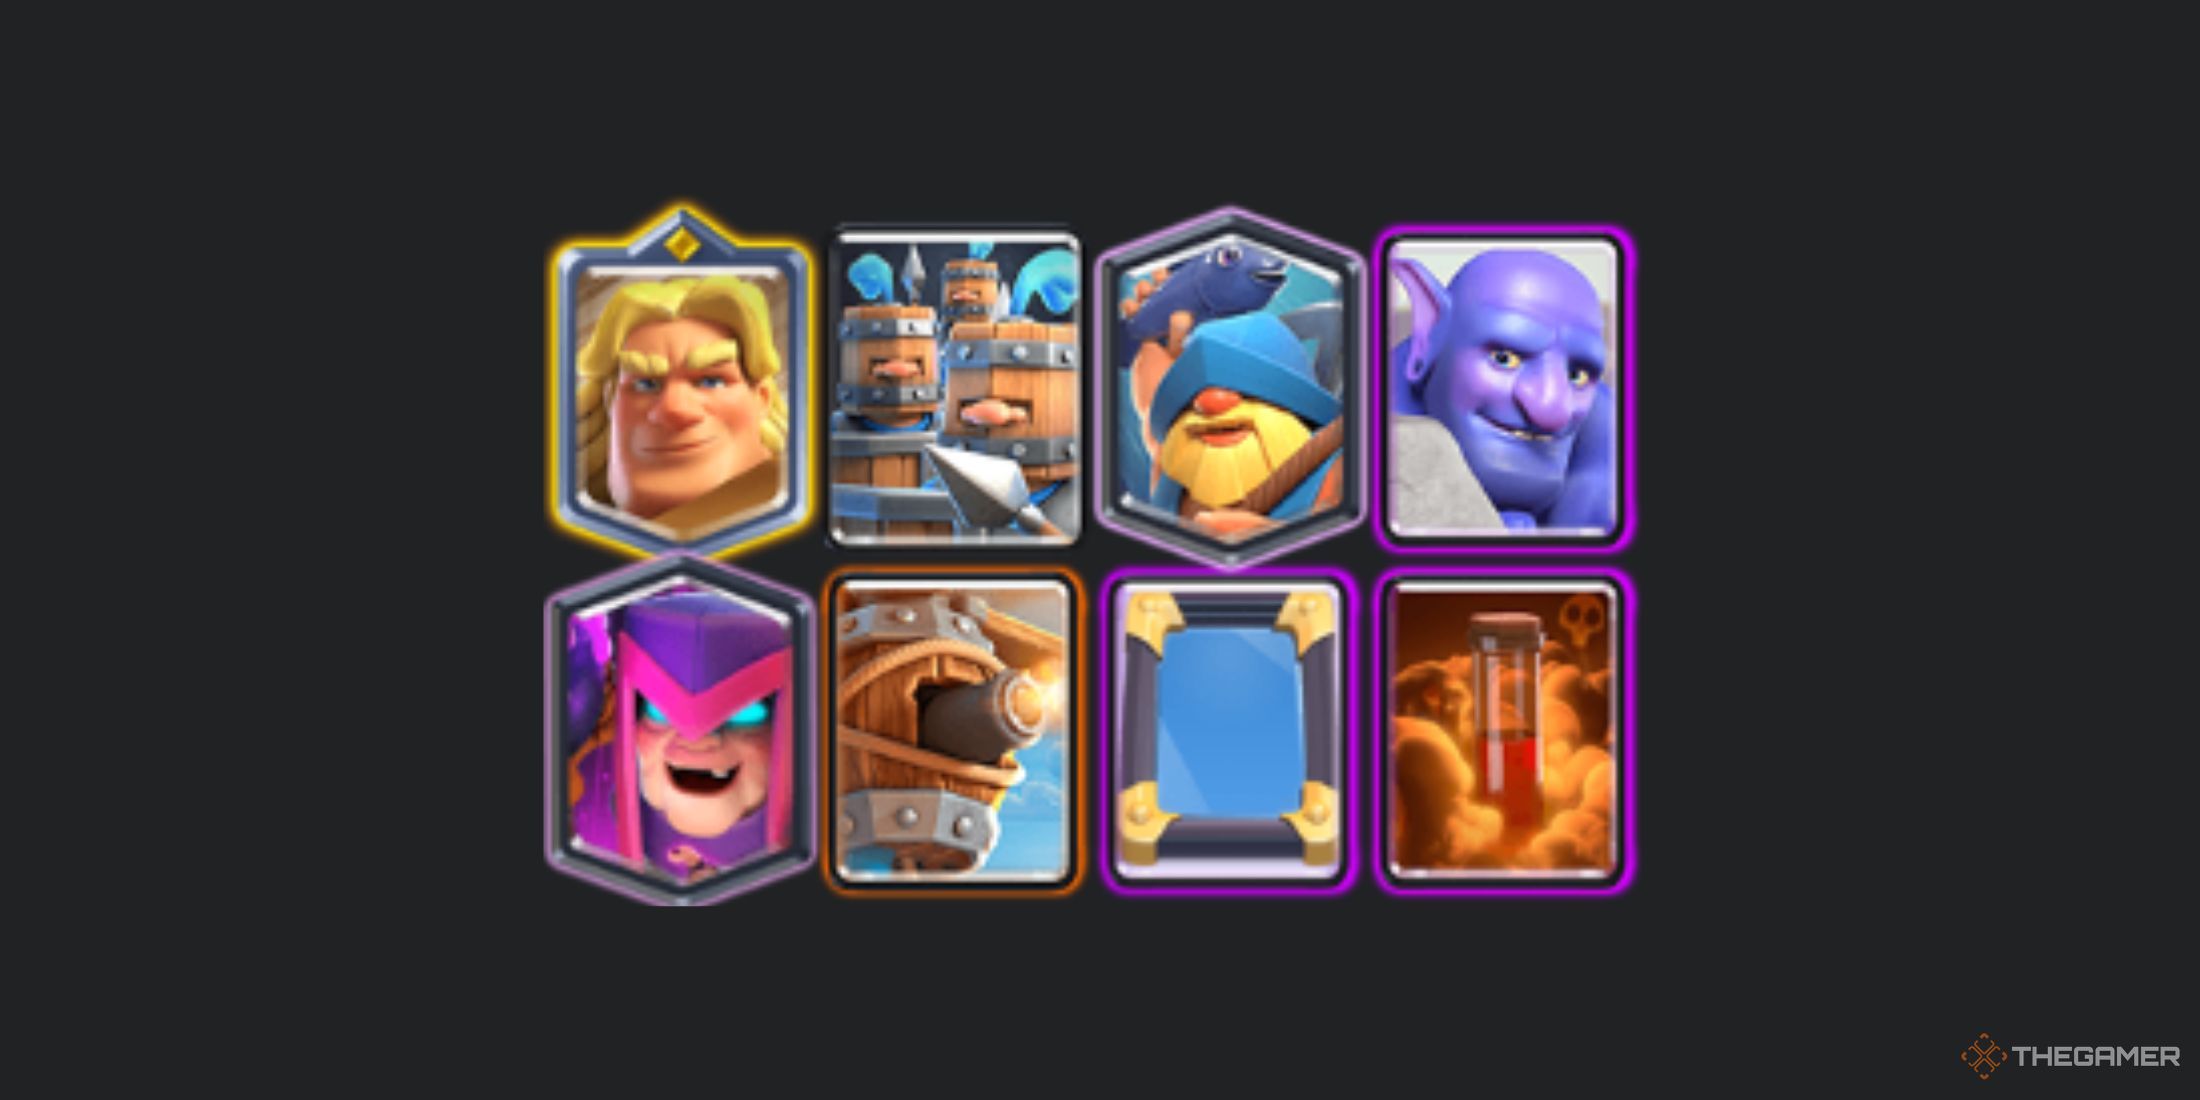 A deck in Clash Royale with Golden Knight, Royal Recruits, Fisherman, Bowler, Mother Witch, Flying Machine, Mirror Spell and Poison Spell.